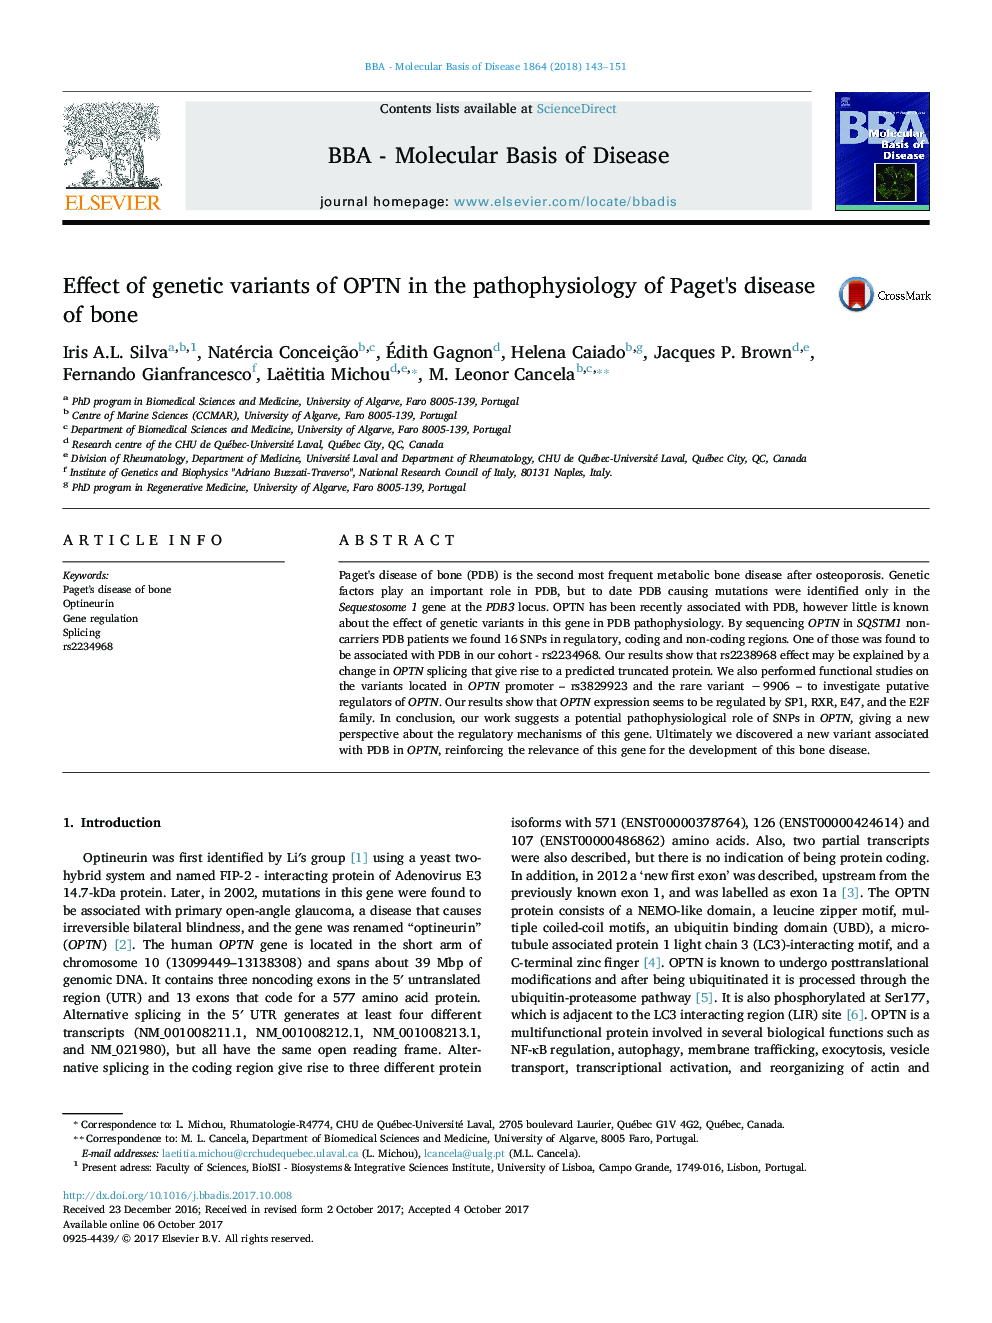 Effect of genetic variants of OPTN in the pathophysiology of Paget's disease of bone